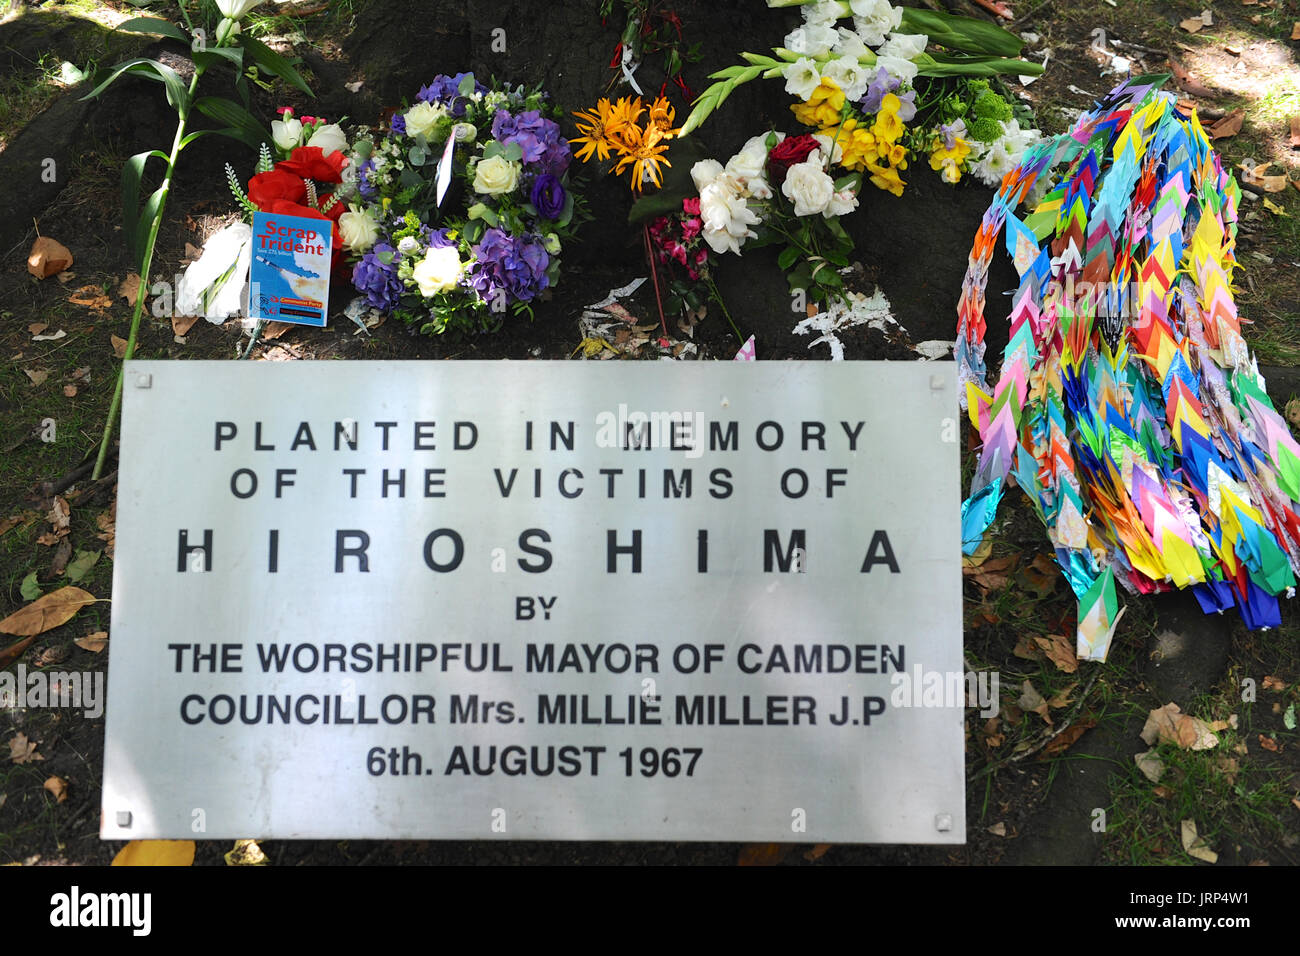 London, UK. 06th Aug, 2017. Flowers underneath the memorial cherry tree in Tavistock Square during the Campaign for Nuclear Disarmament’s annual commemoration of the atomic bombing of Hiroshima, Japan in Tavistock Square, London, United Kingdom.   The attack took place at 8.15am, 6 August 1945, when the Enola Gay Boeing B-29 Superfortress bomber dropped the ‘Little Boy’ atomic bomb, the first use of the weapon in history. The bomb is estimated to have killed between 100,000 and 180,000 people, and devastated the city. Credit: Michael Preston/Alamy Live News Stock Photo